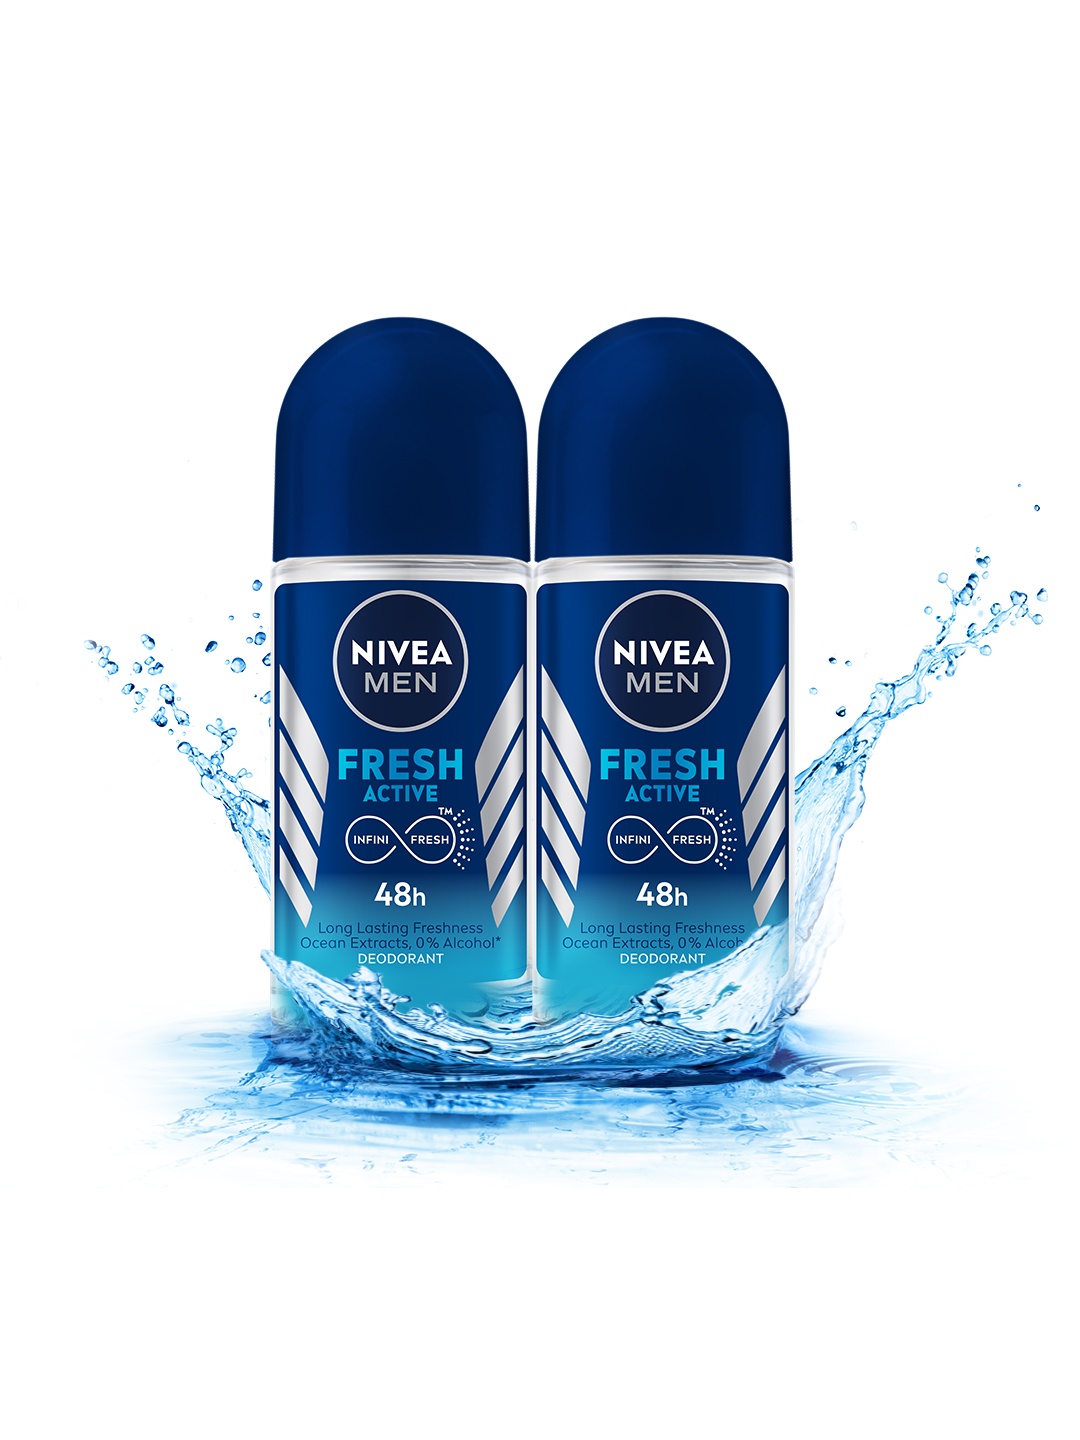 

Nivea Men Set Of 2 Fresh Active Deodorant Roll On with Ocean Extracts - 50ml Each, Navy blue